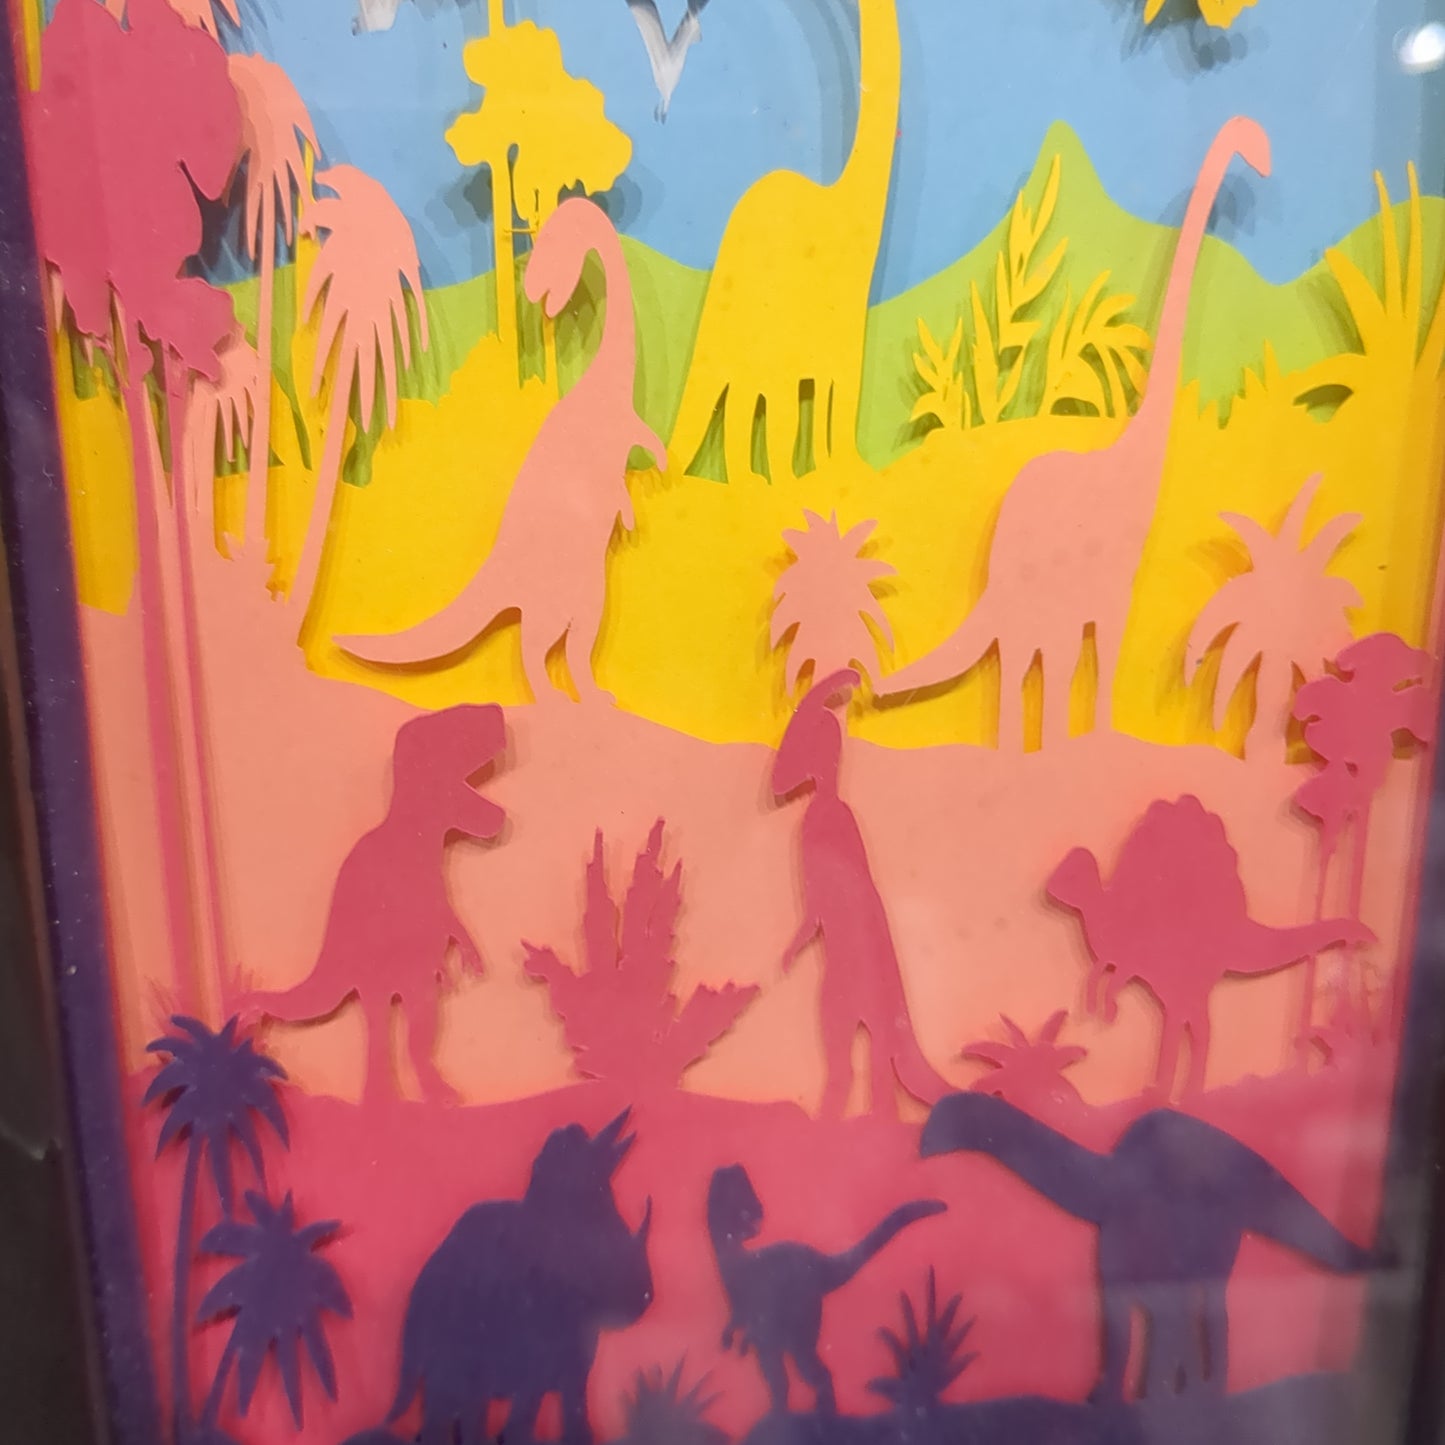 Roughly 8 x 6 x 1” black shadow box with a colorful paper cut dinosaur serene